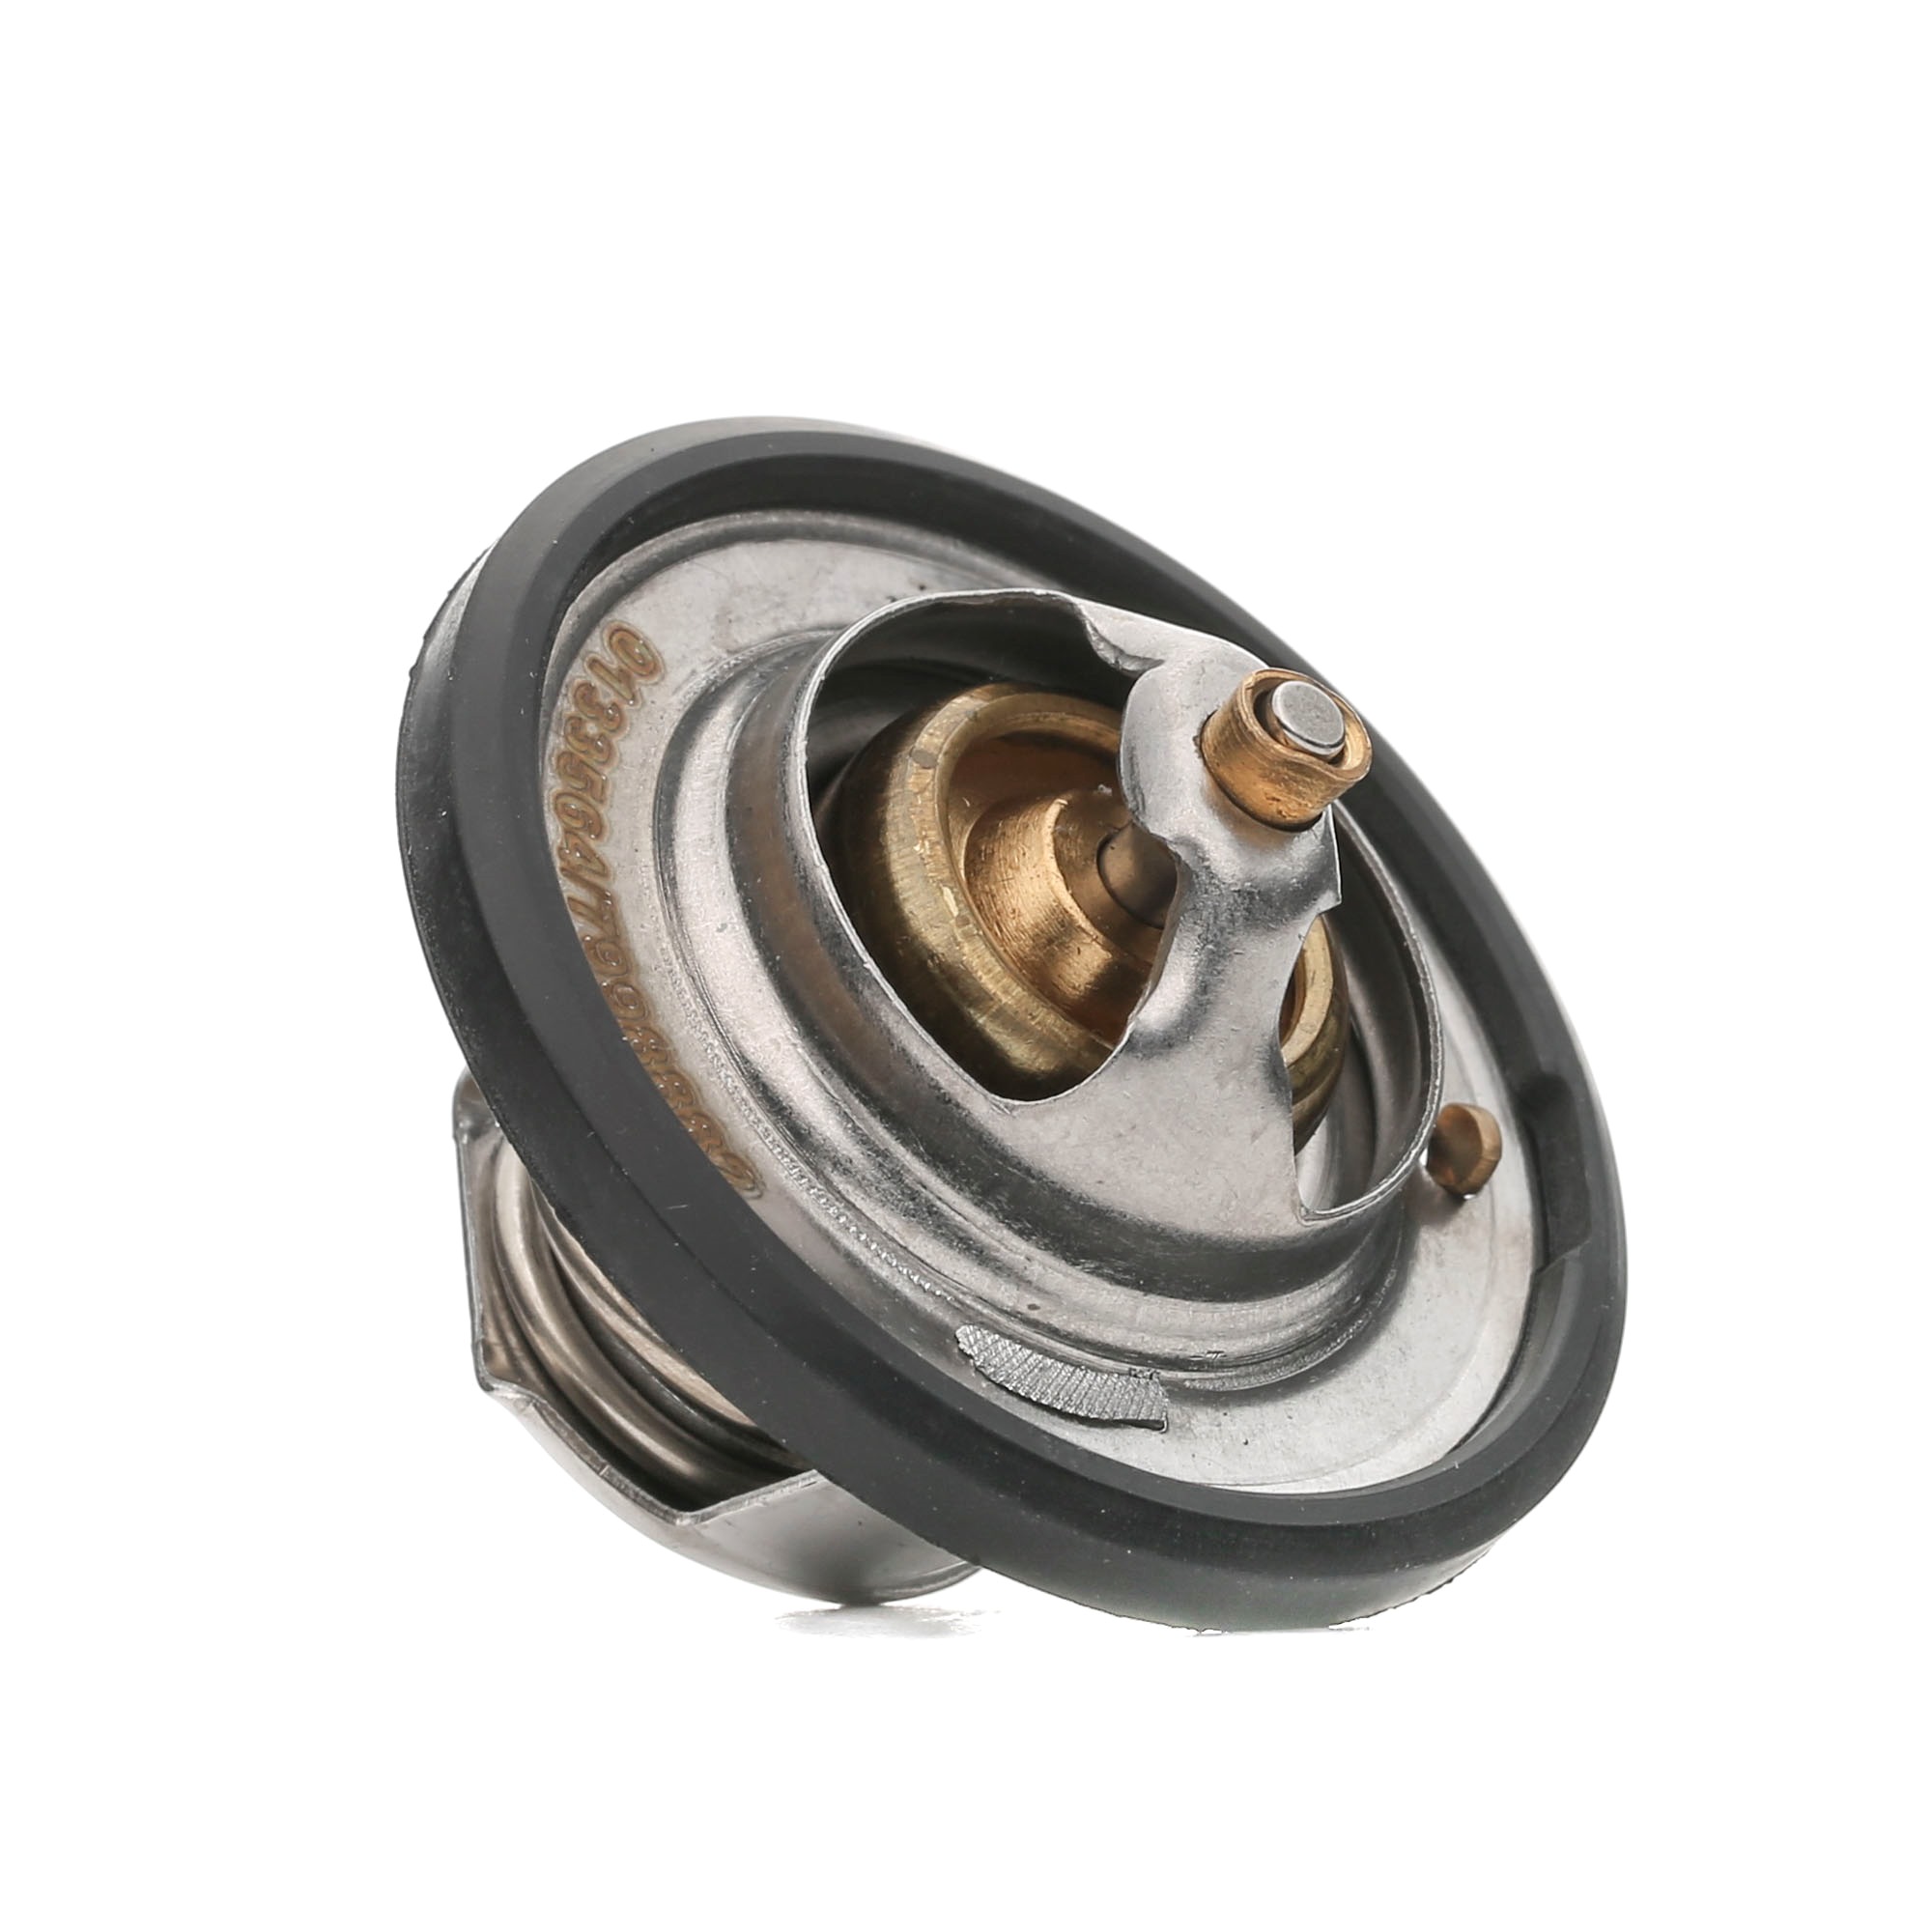 STARK SKTC-0560019 Engine thermostat Opening Temperature: 92°C, with seal